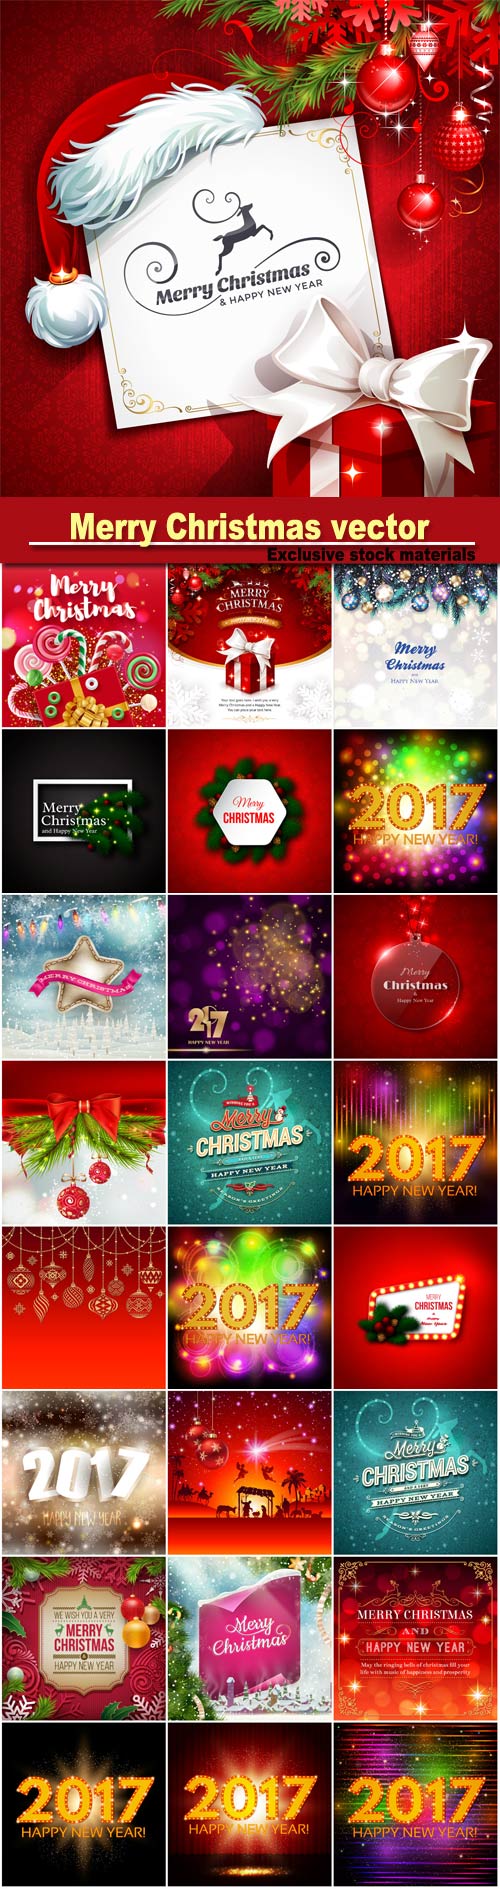 Merry Christmas greeting colorful vector illustration, New year background